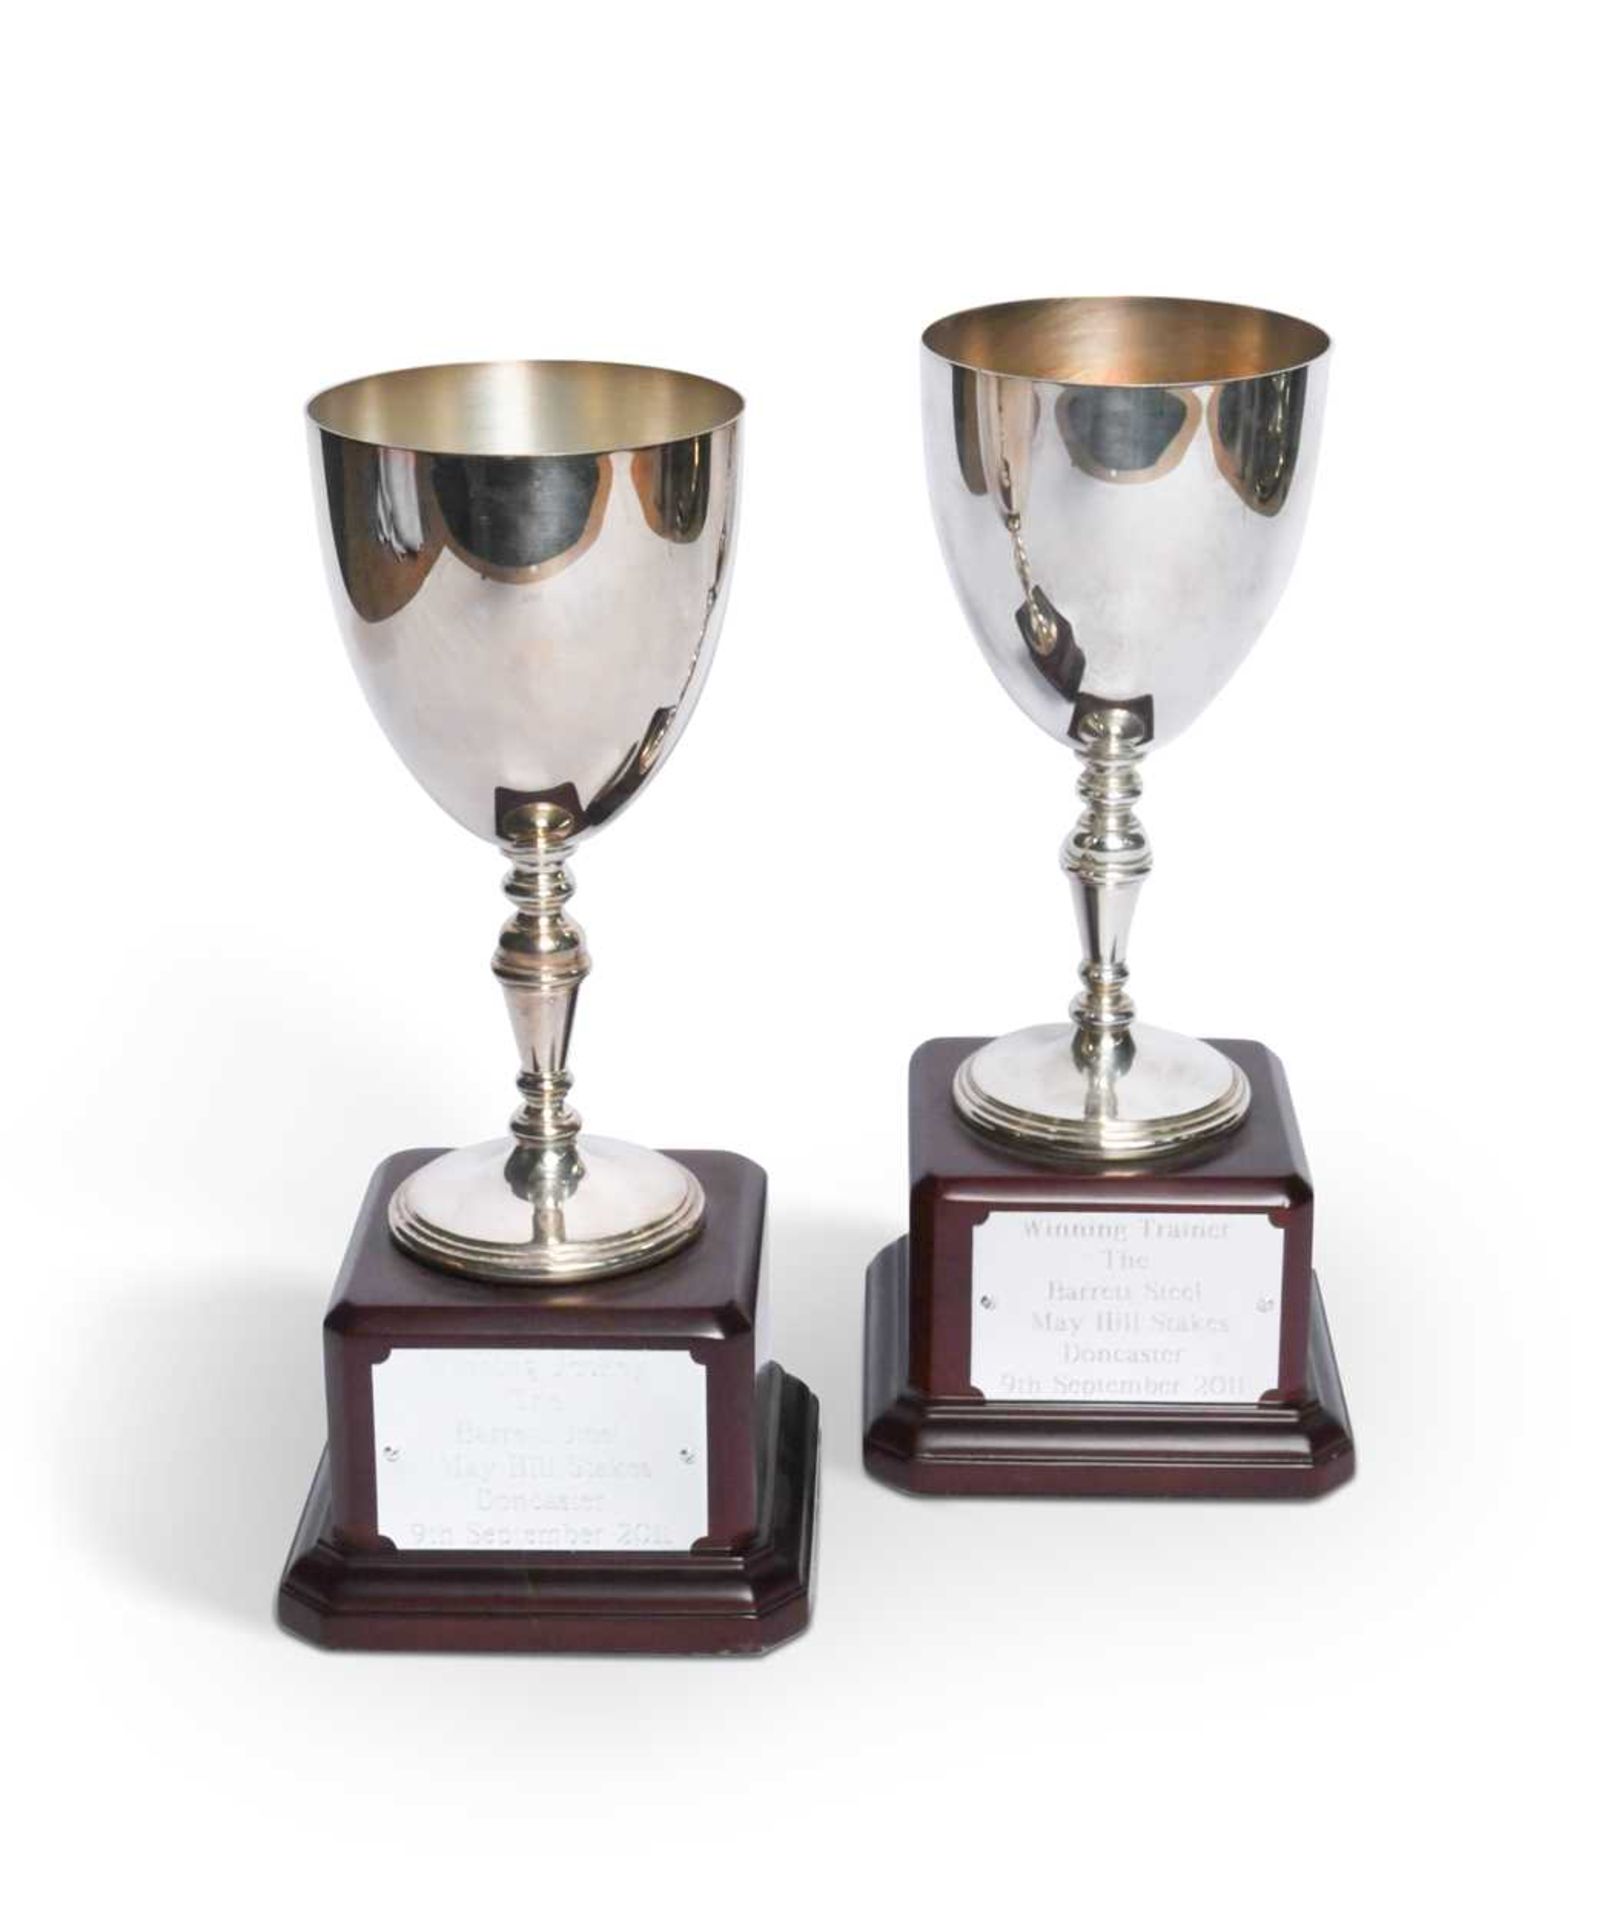 A pair of The Barrett Steel May Hill stakes trophy cups, awarded to Frankie Dettori,